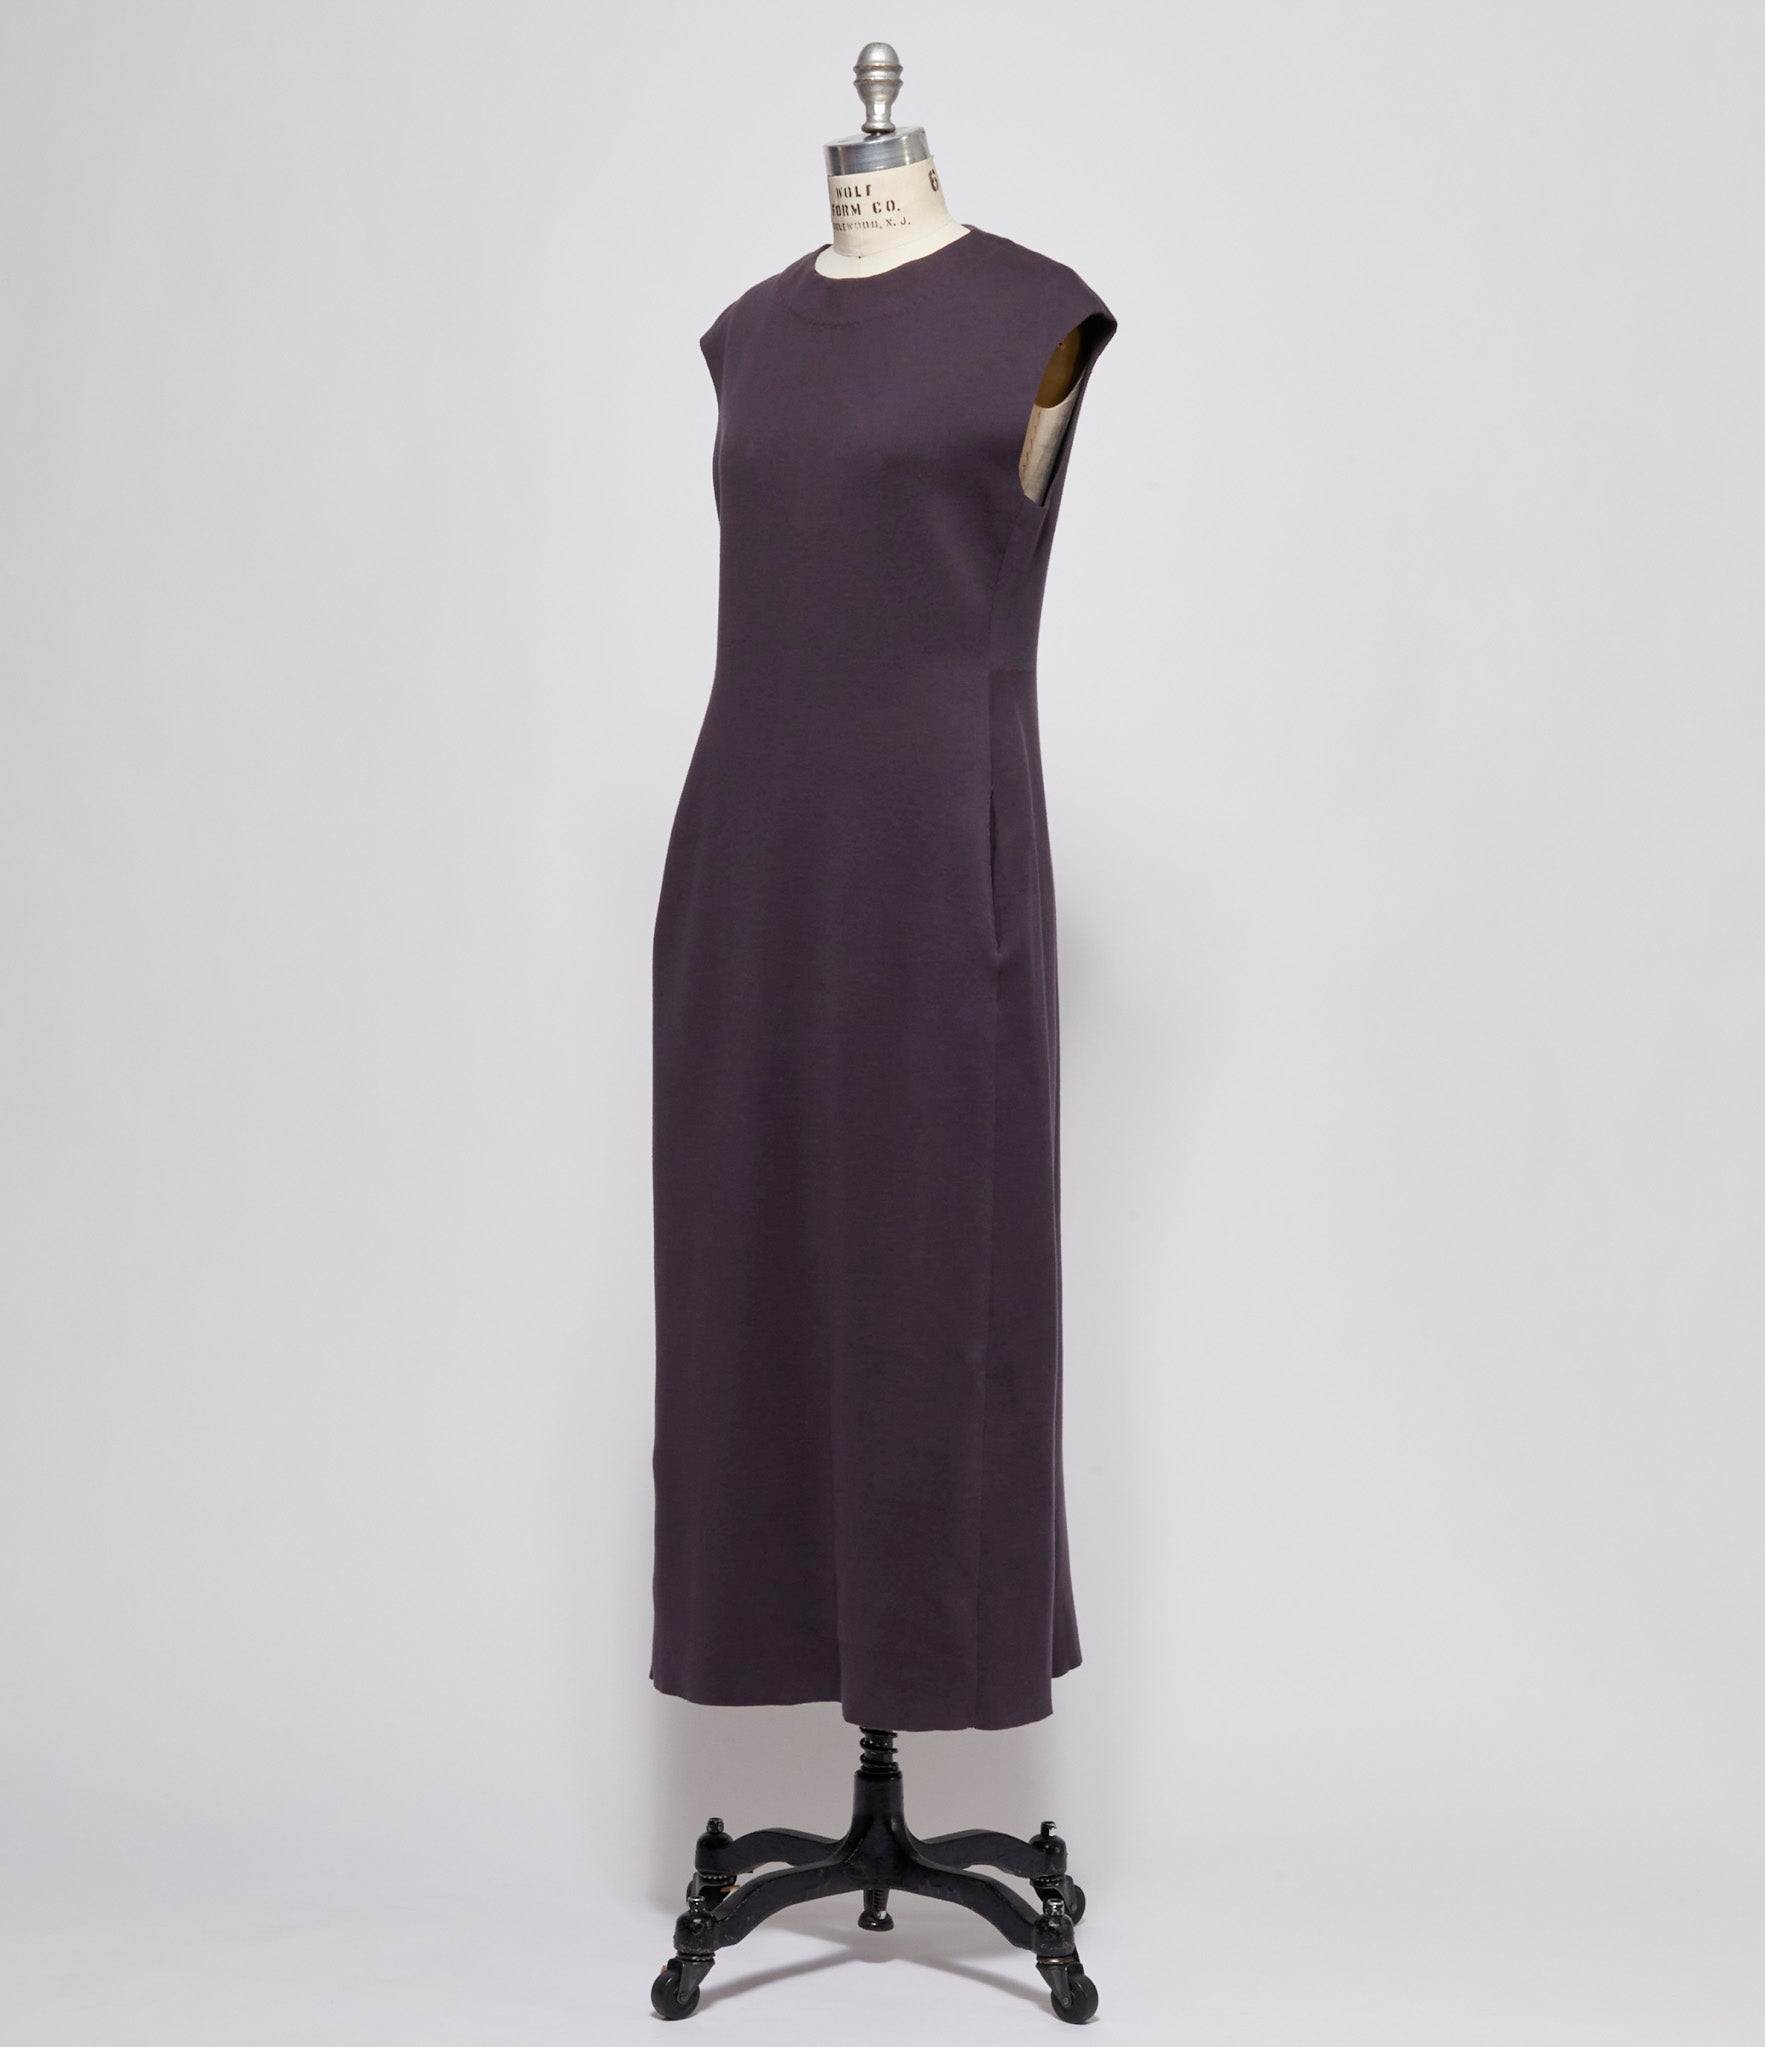 Boboutic Solid Brown Sleeveless Dress